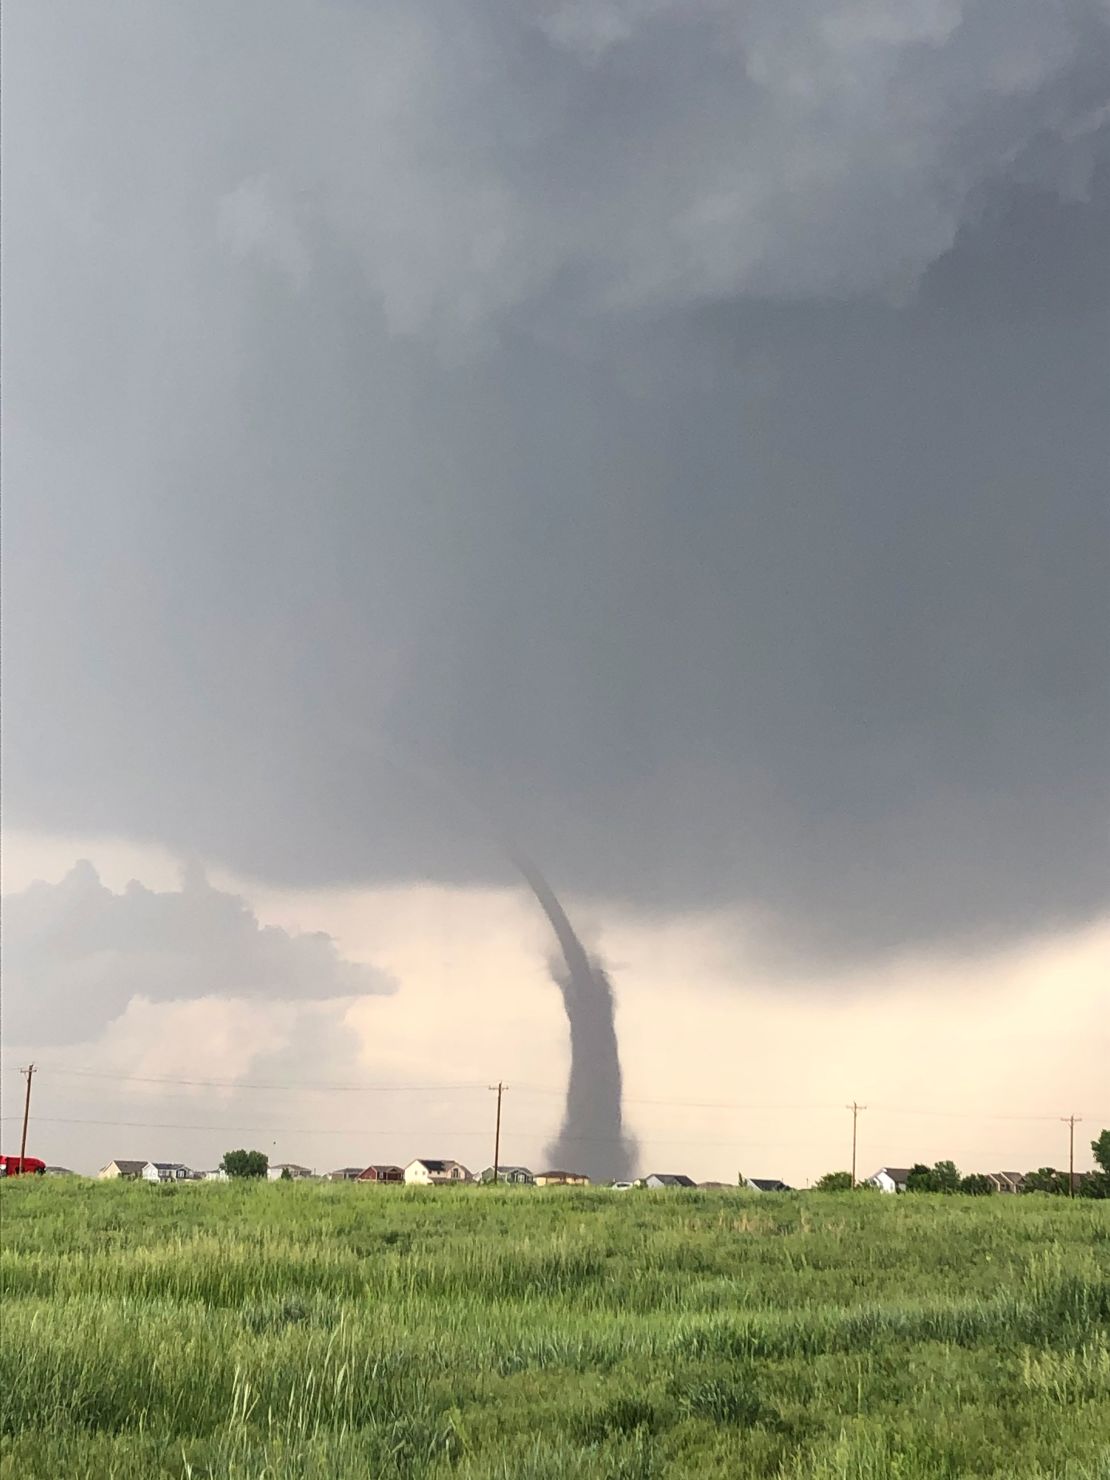 A National Weather Service employee took this photo of the tornado.